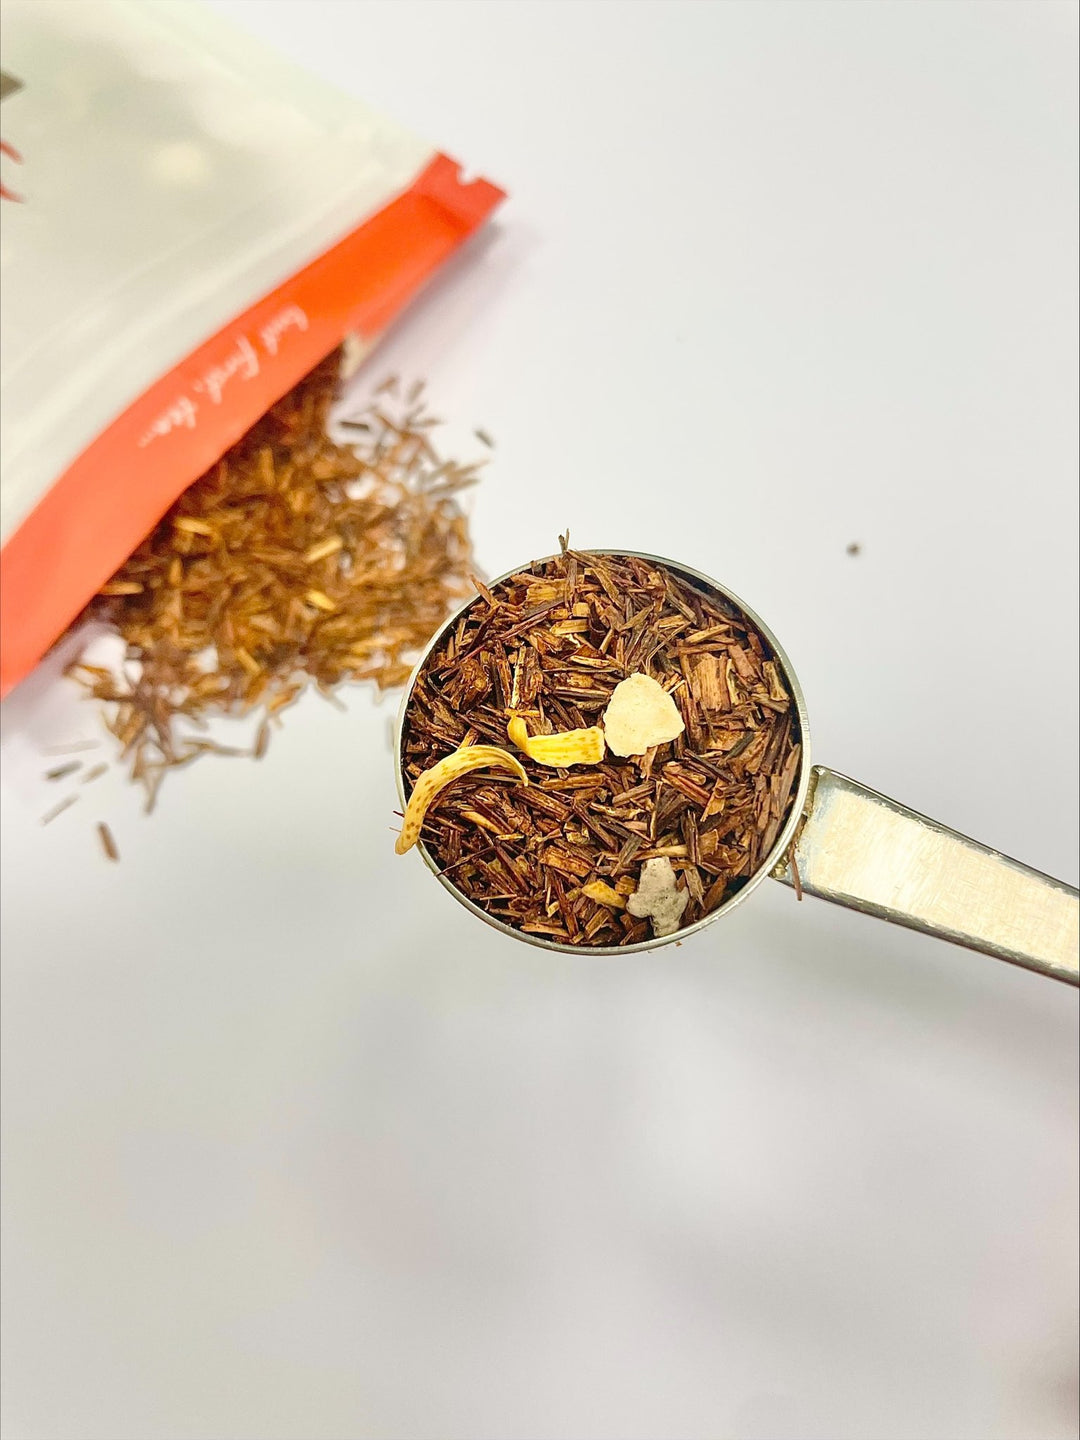 TERRY'S ROOIBOS